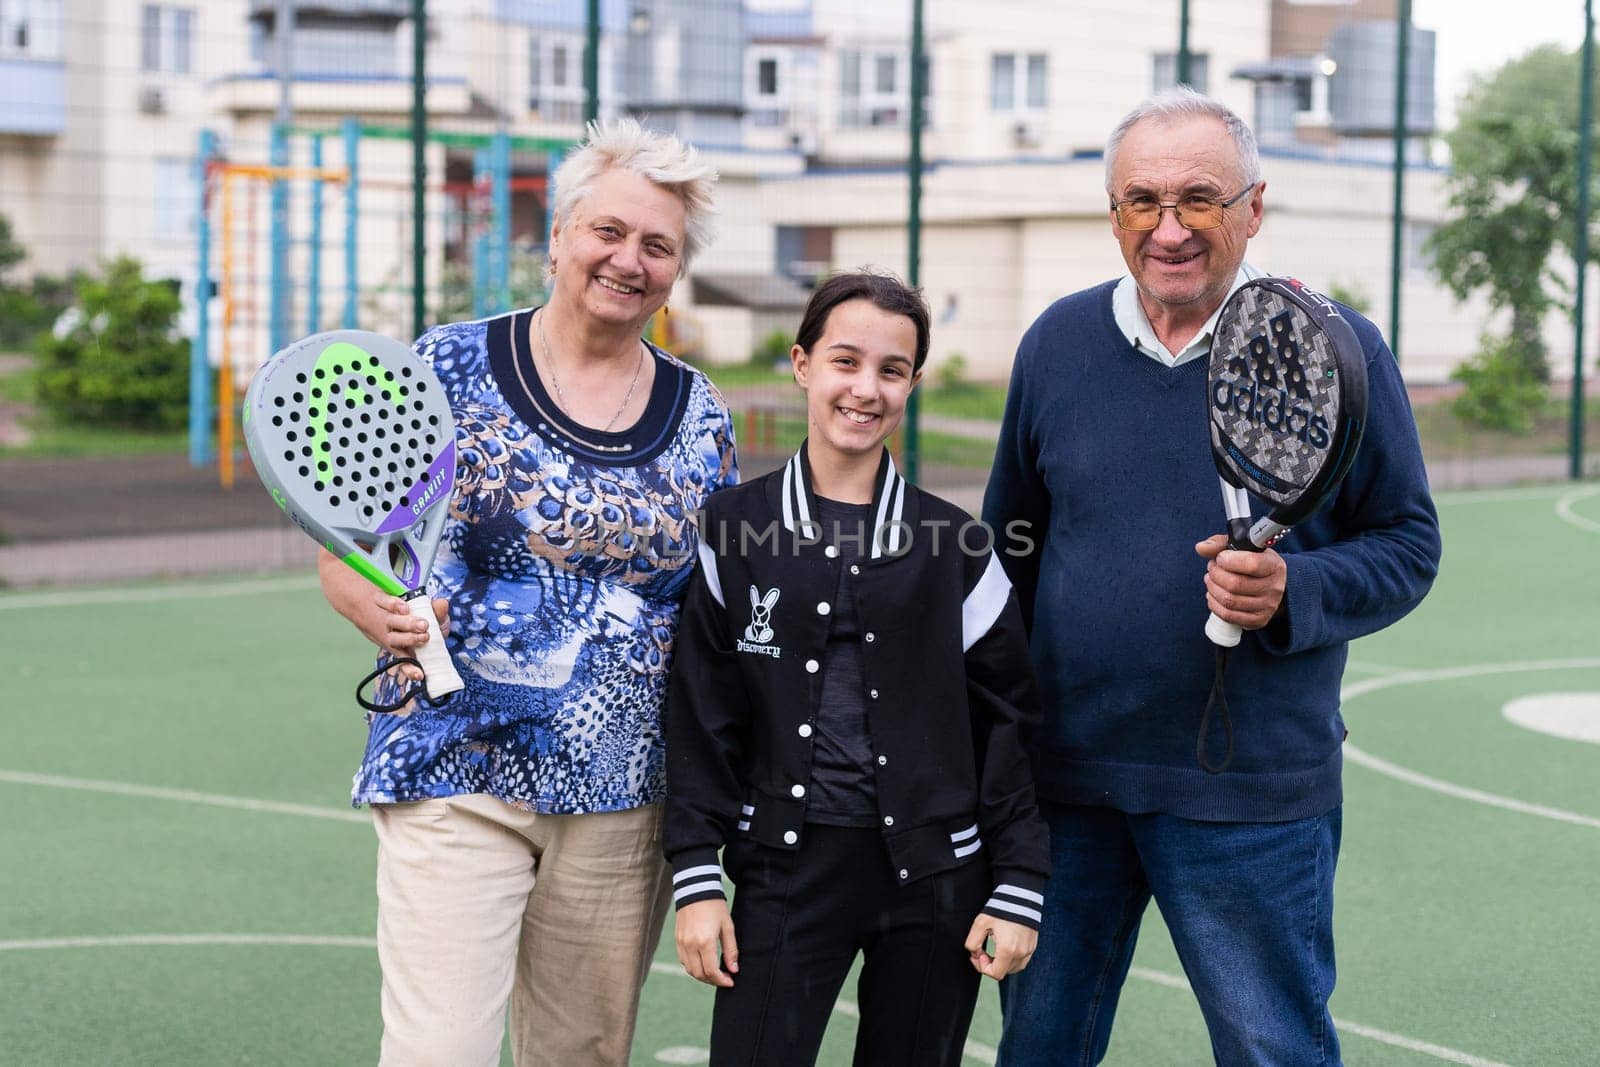 Ukraine, Kyiv, May 05, 2024, Happy cheerful positive smiling padel players of different generations posing on padel court. High quality photo